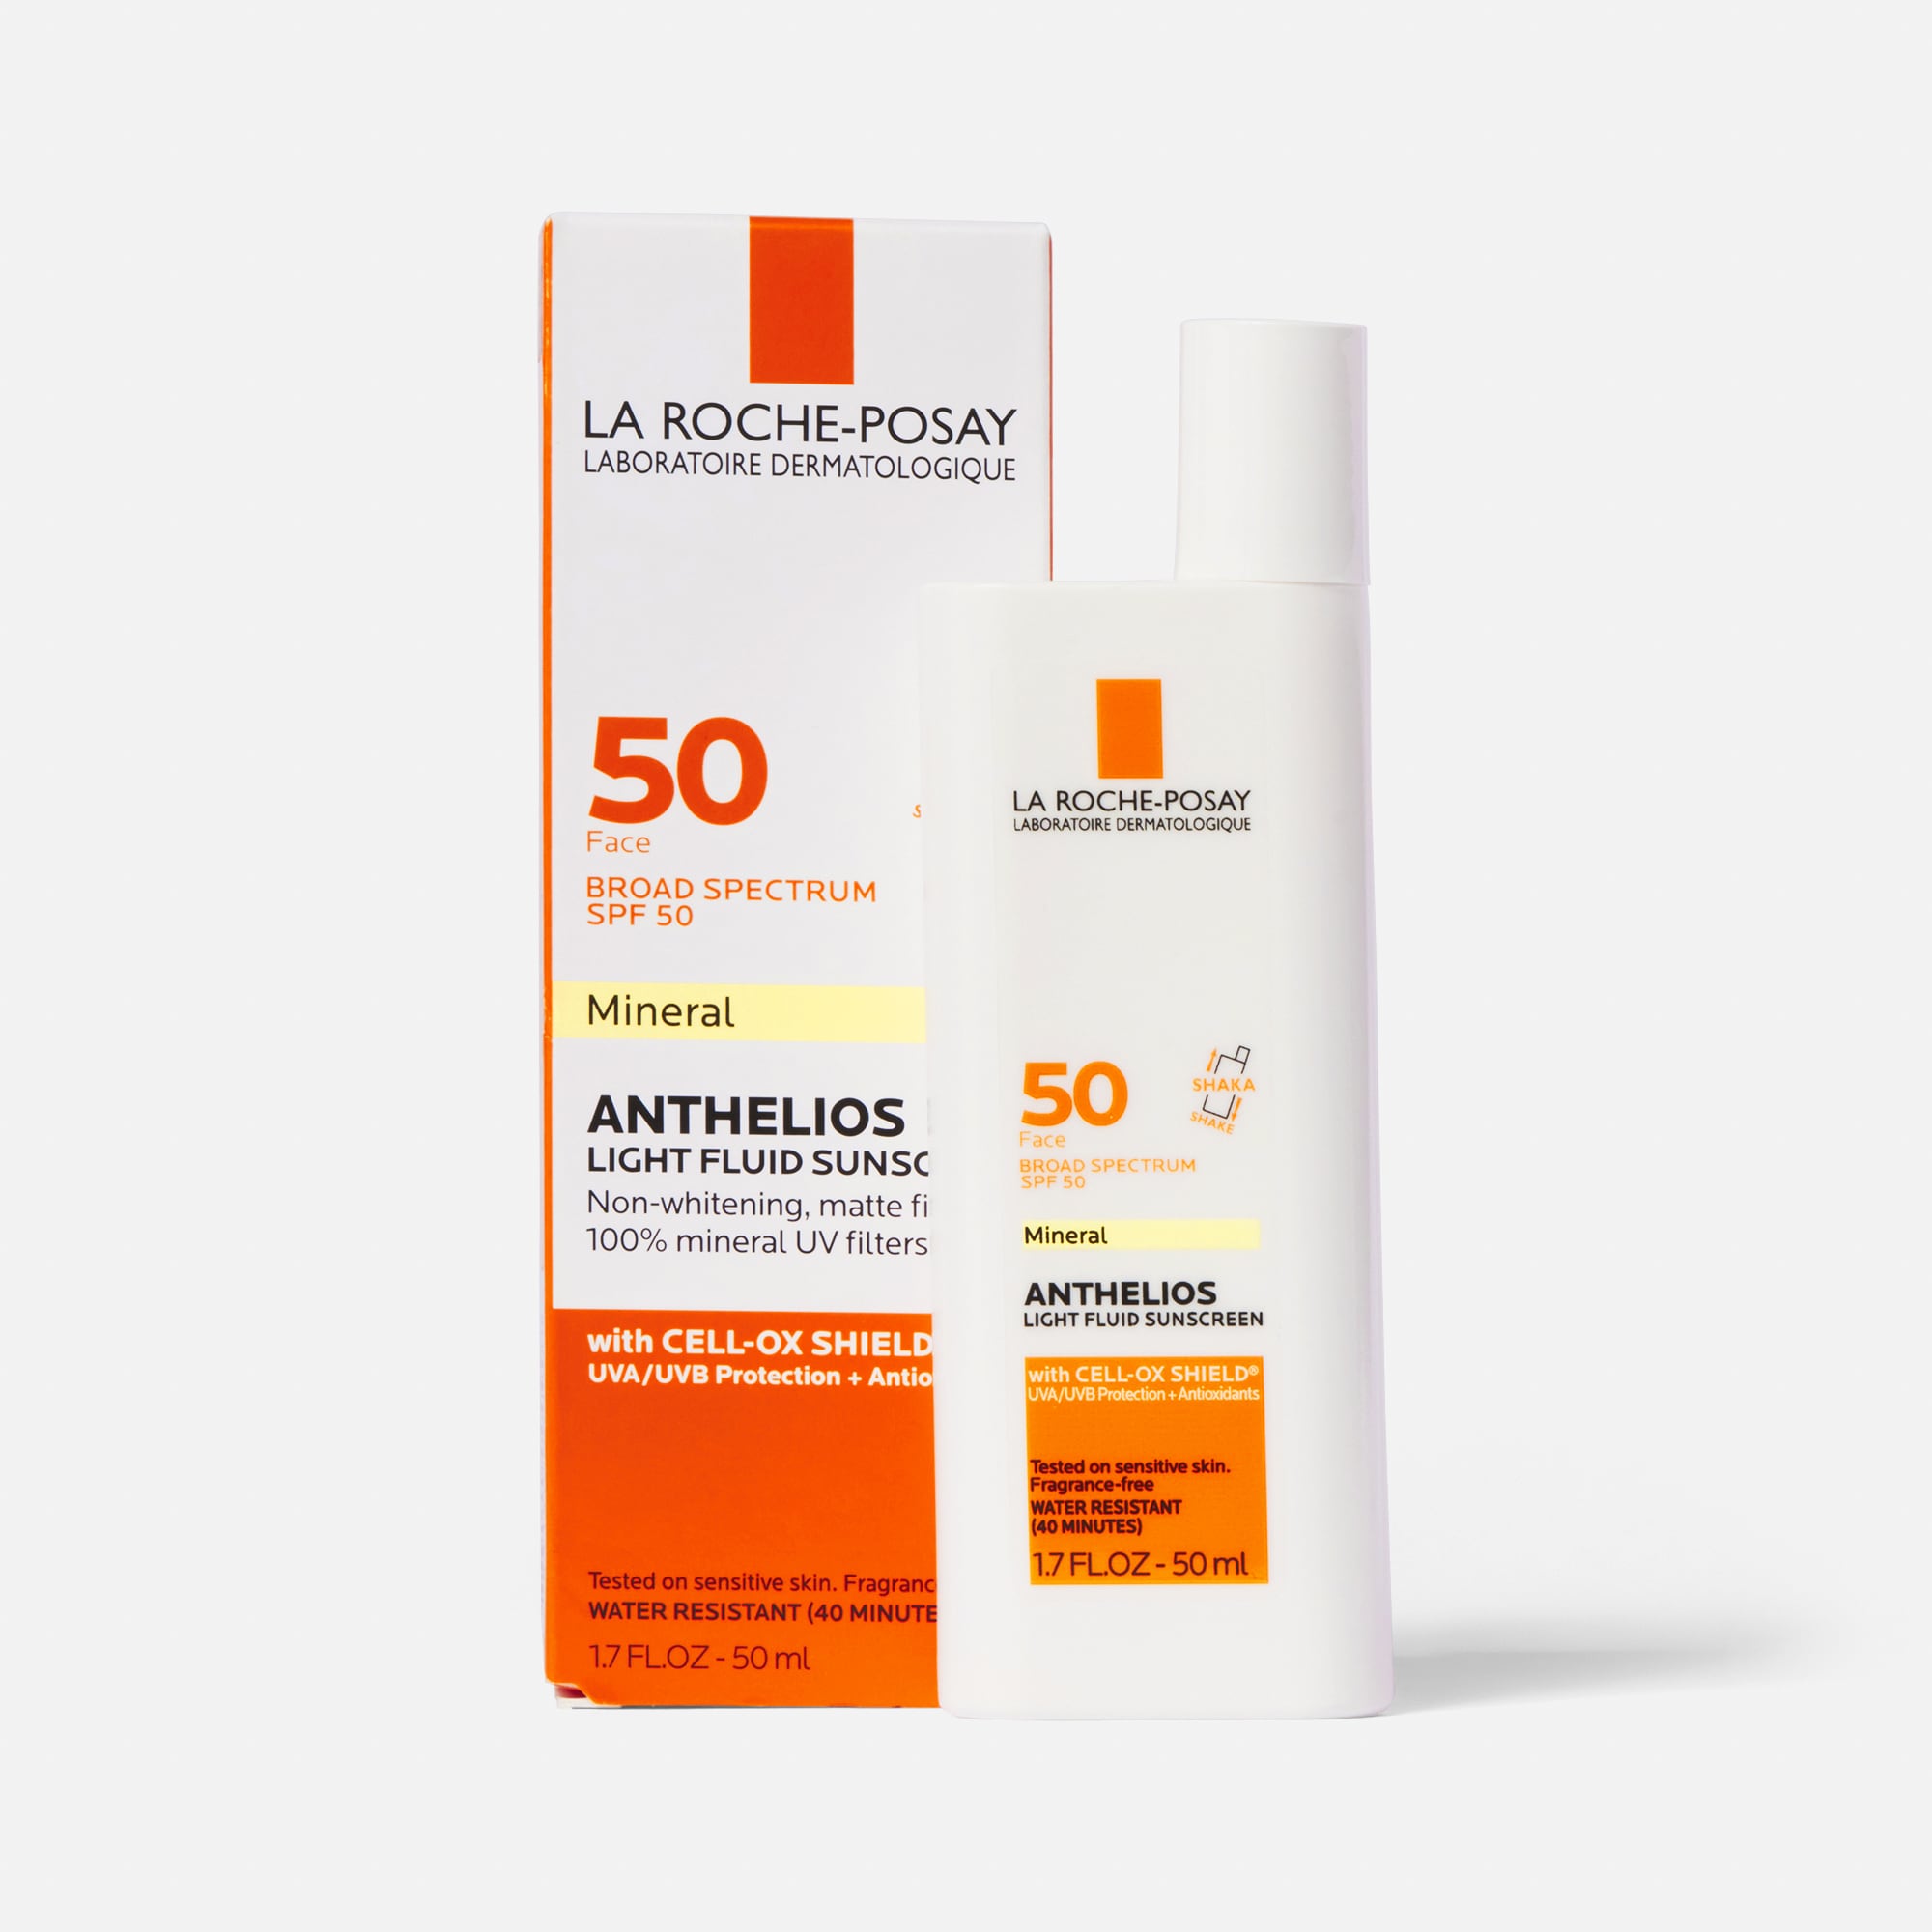 La Roche-Posay Anthelios Mineral Sunscreen Ultra-Light for Face, SPF 50 with Zinc Oxide and